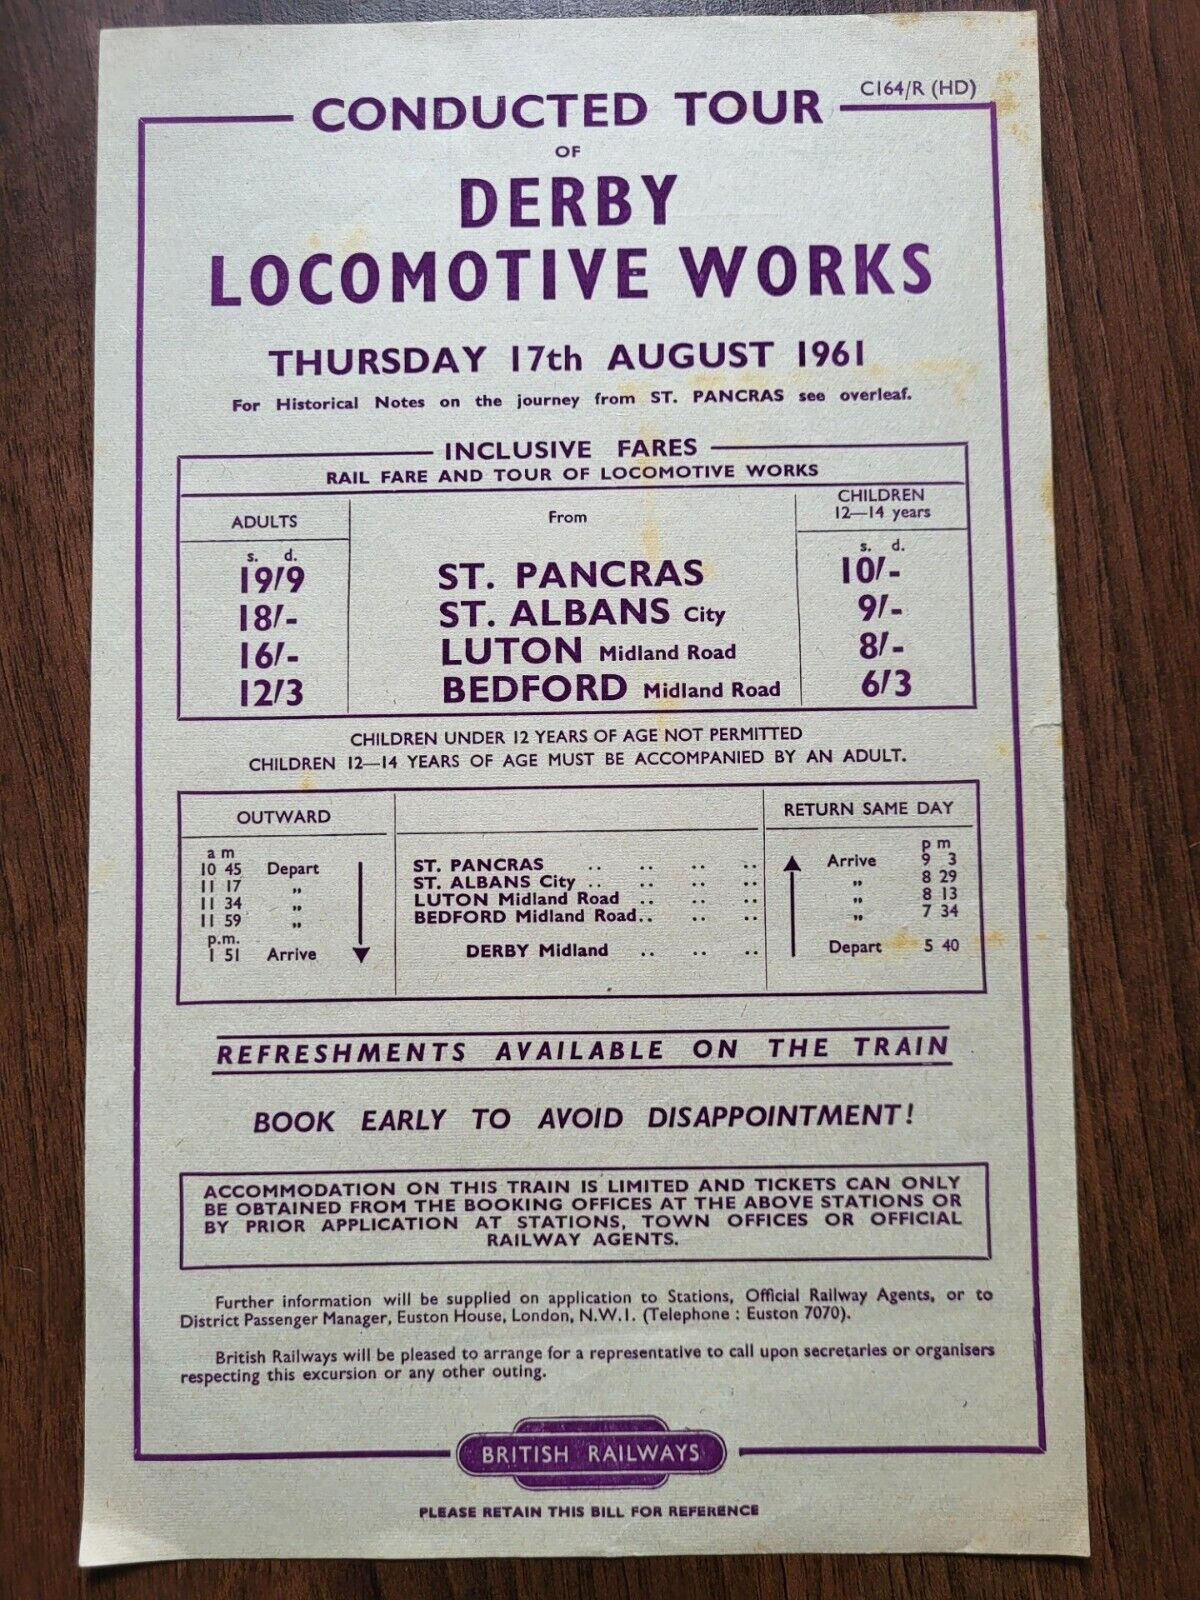 August 1961 BR Handbill TIMETABLE DERBY CONDUCTED TOUR LOCOMOTIVE WORKS